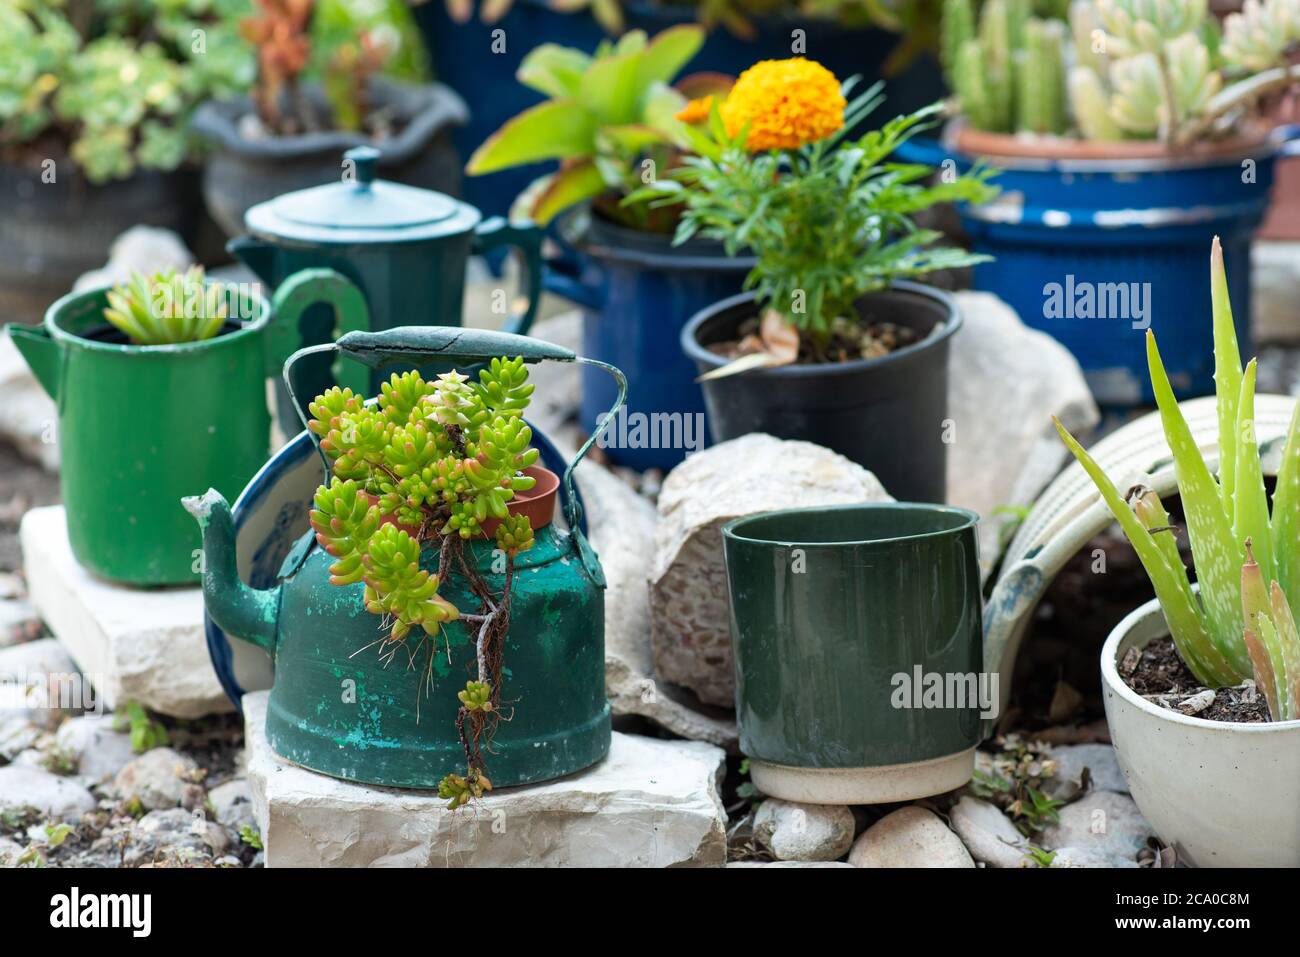 Reduce, reuse, recycle planter, craft ideas. Second-hand kettles, saucepans, old teapots turn into garden flower pots. Recycled amazing garden design and low-waste lifestyle. Stock Photo